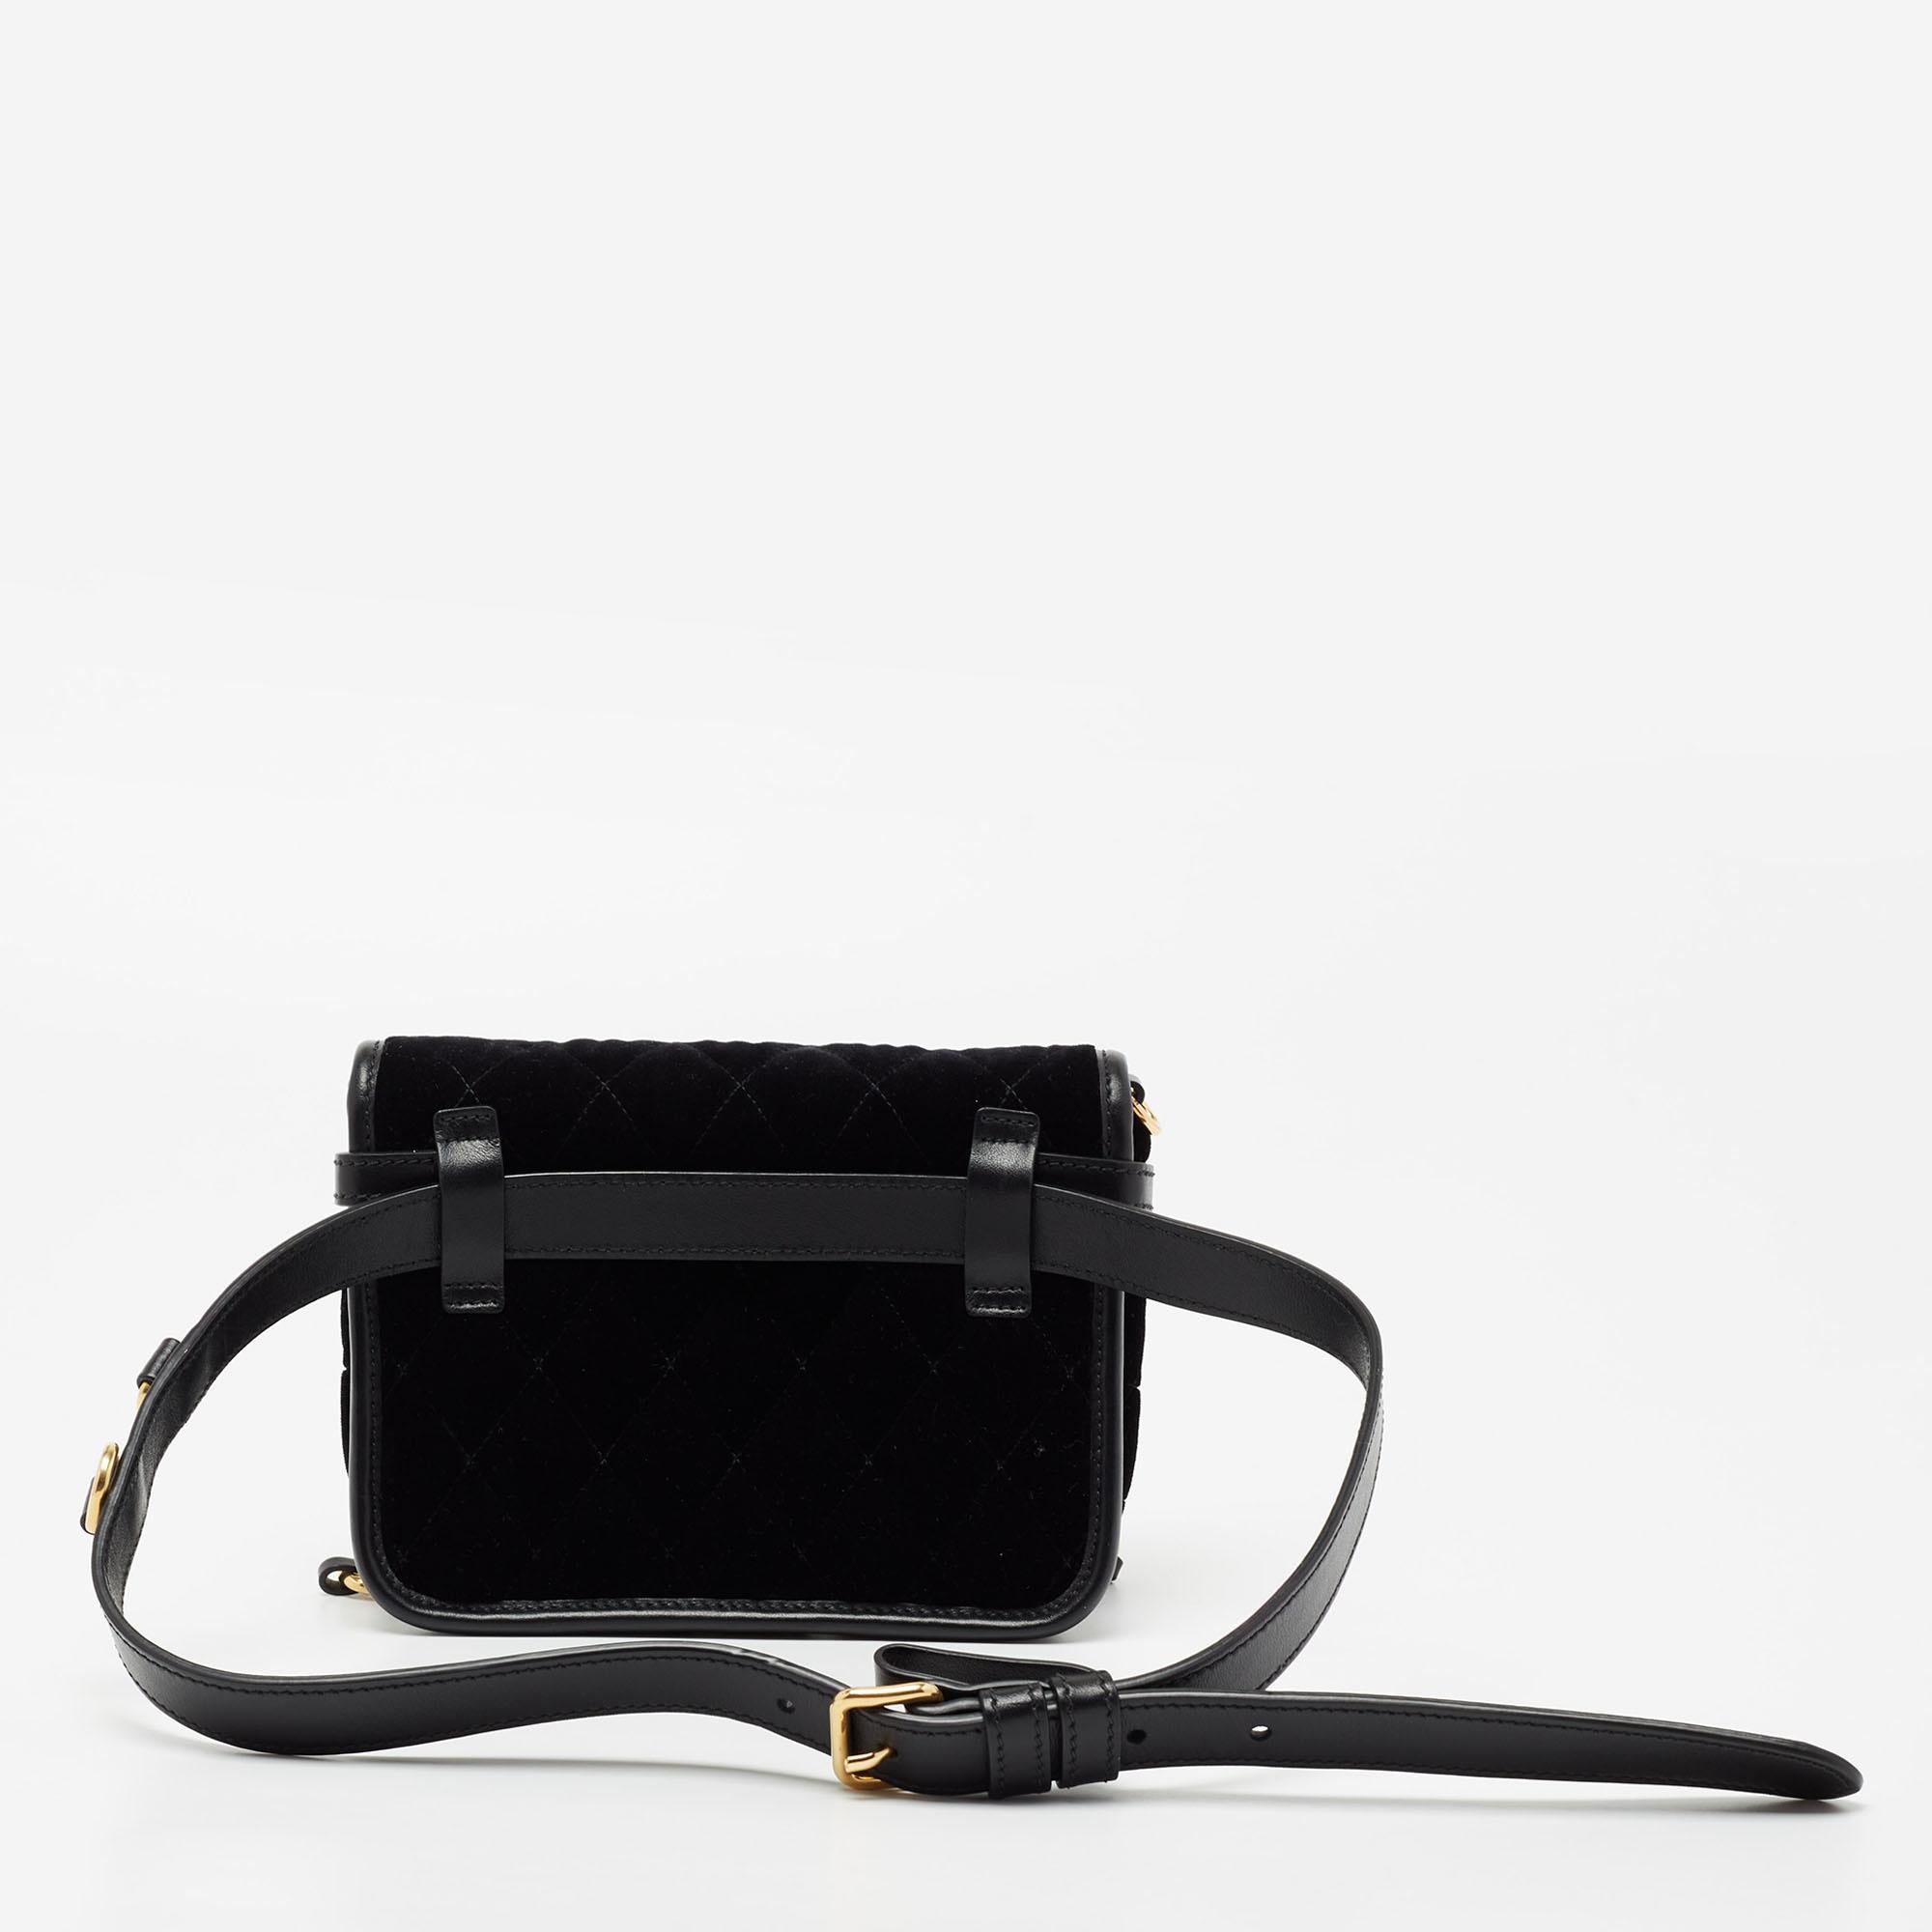 This Prada velvet & leather belt bag for women highlights convenient style in the best way. The bag has gold-tone ring details, a front brand logo, an adjustable belt strap, and an additional gold-tone chain.

Includes: Detachable chain, Belt Strap